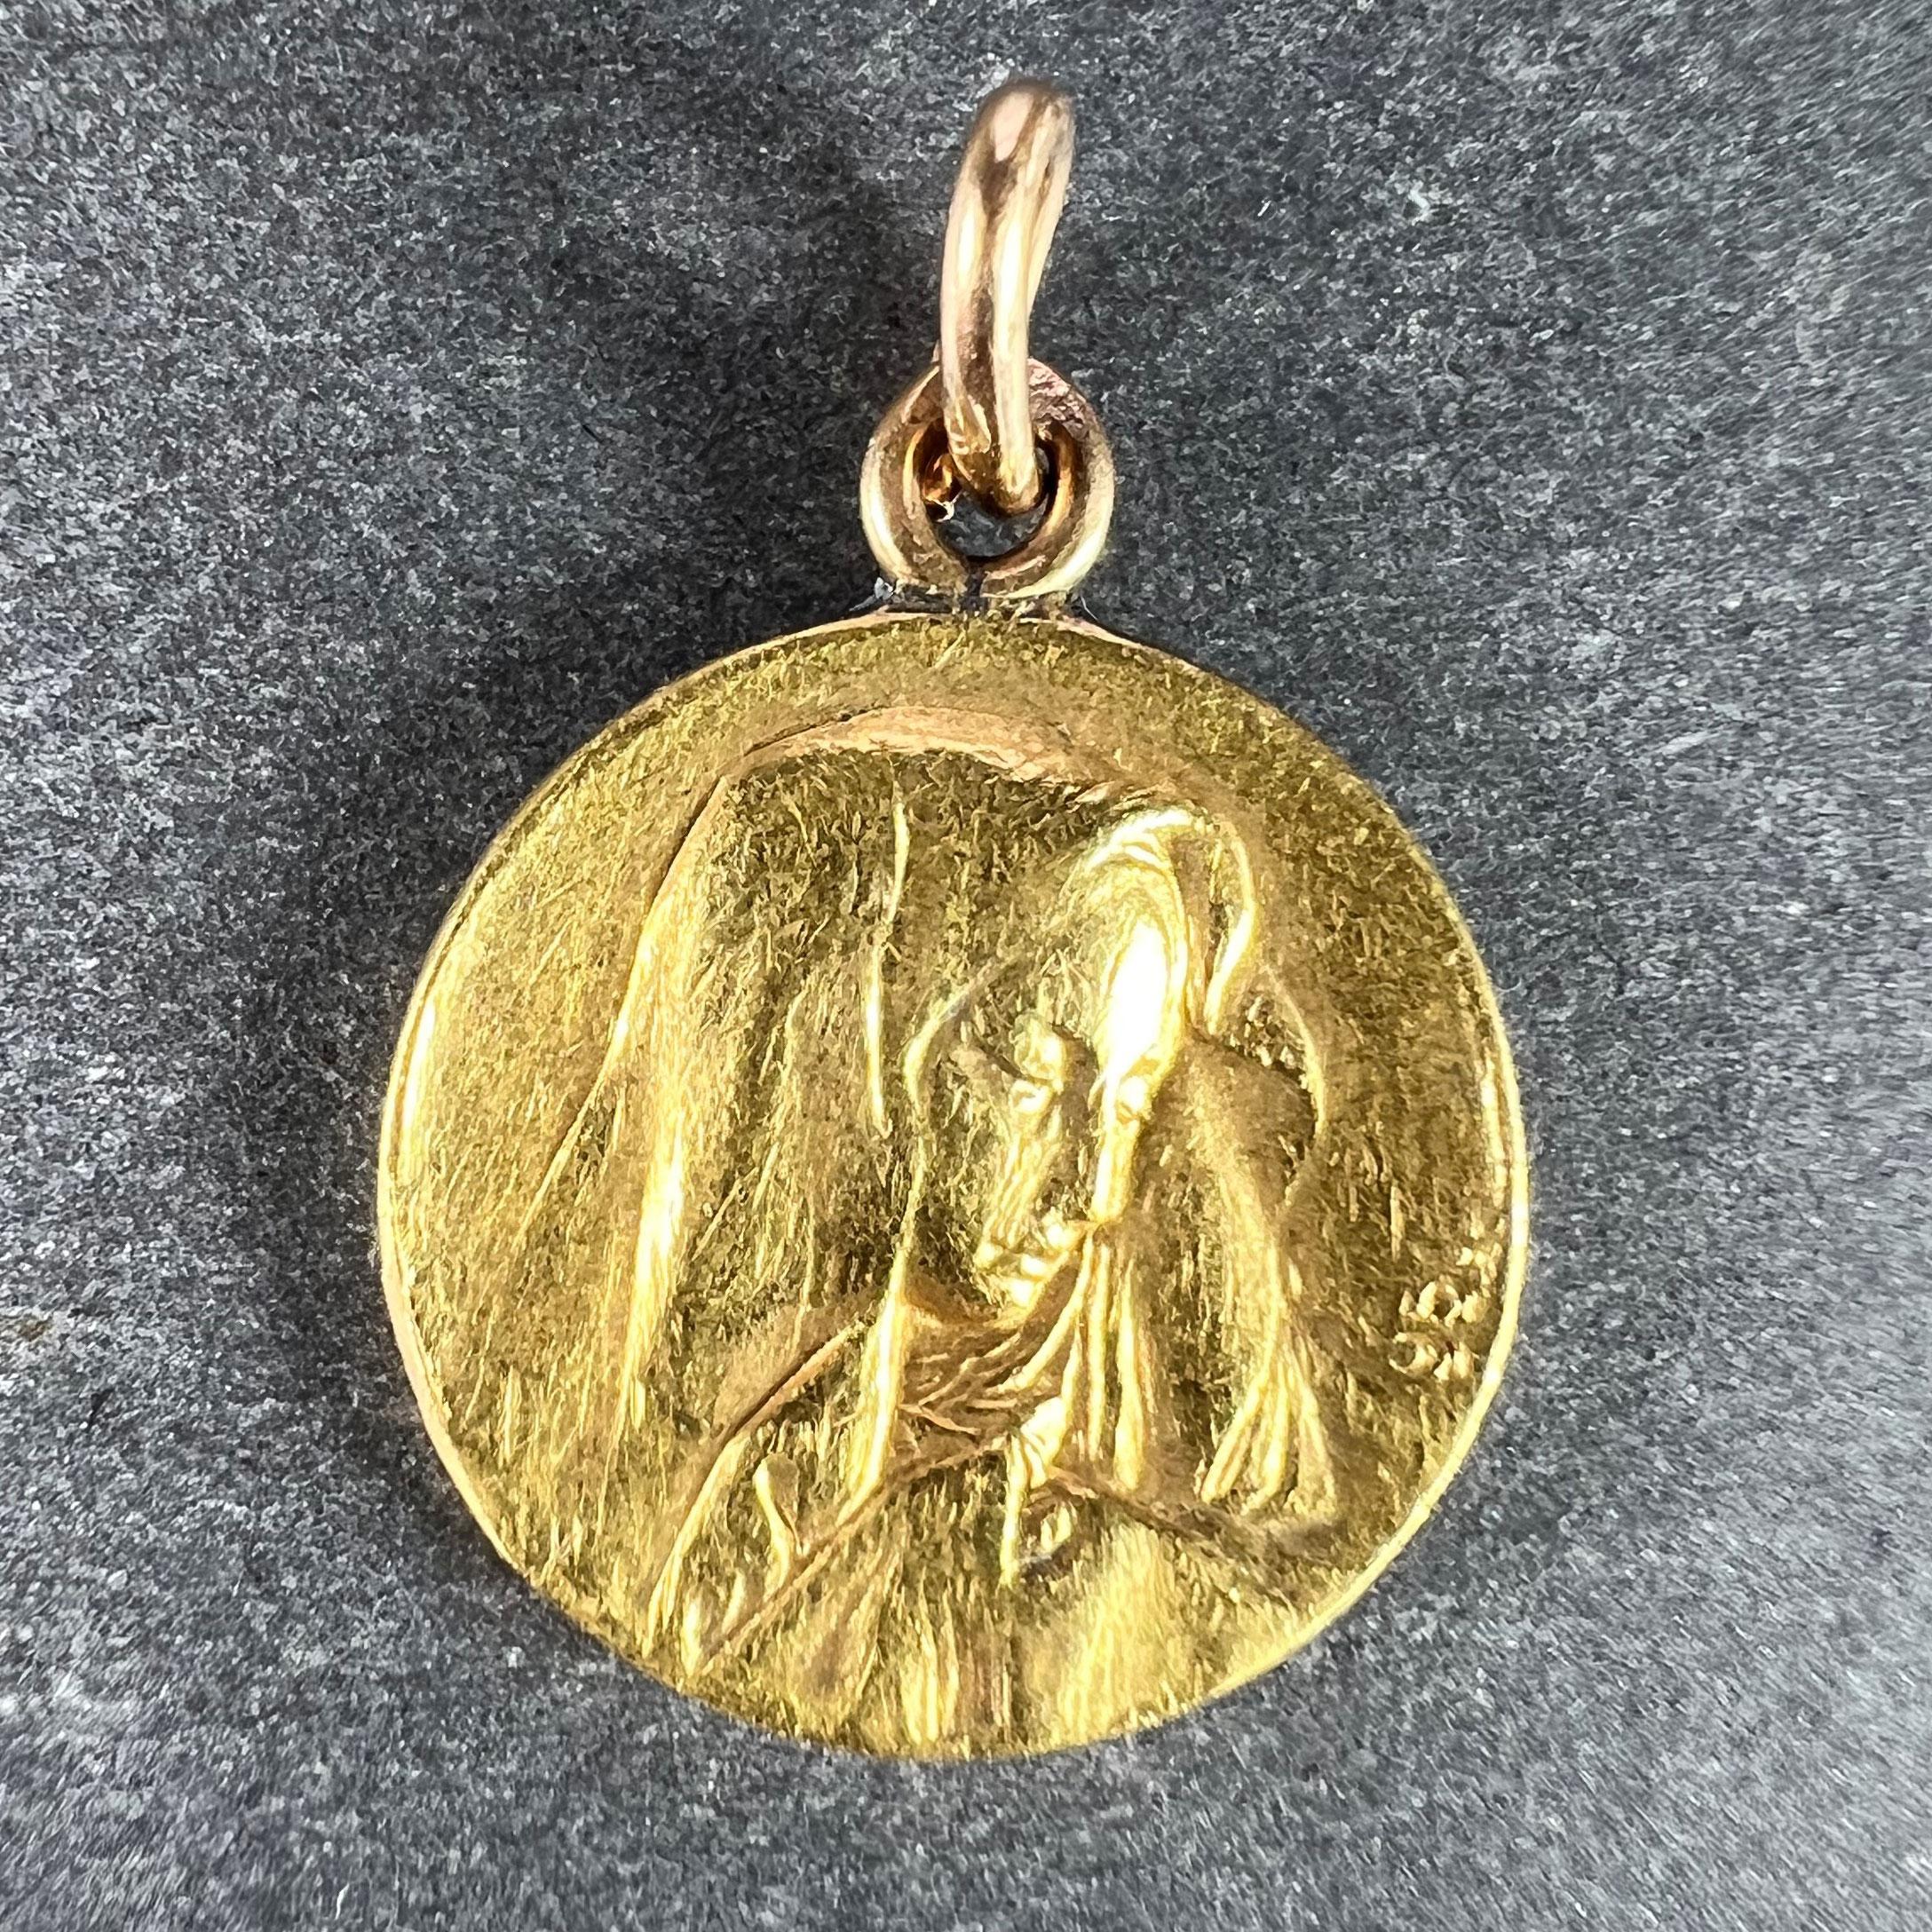 A 23 karat (23K) yellow gold charm pendant designed as a medal depicting the Virgin Mary to one side, and the profile of Pope Pius X to the other. Signed Giacomini, stamped with the owl mark for a minimum of 18 karat gold and French import, and